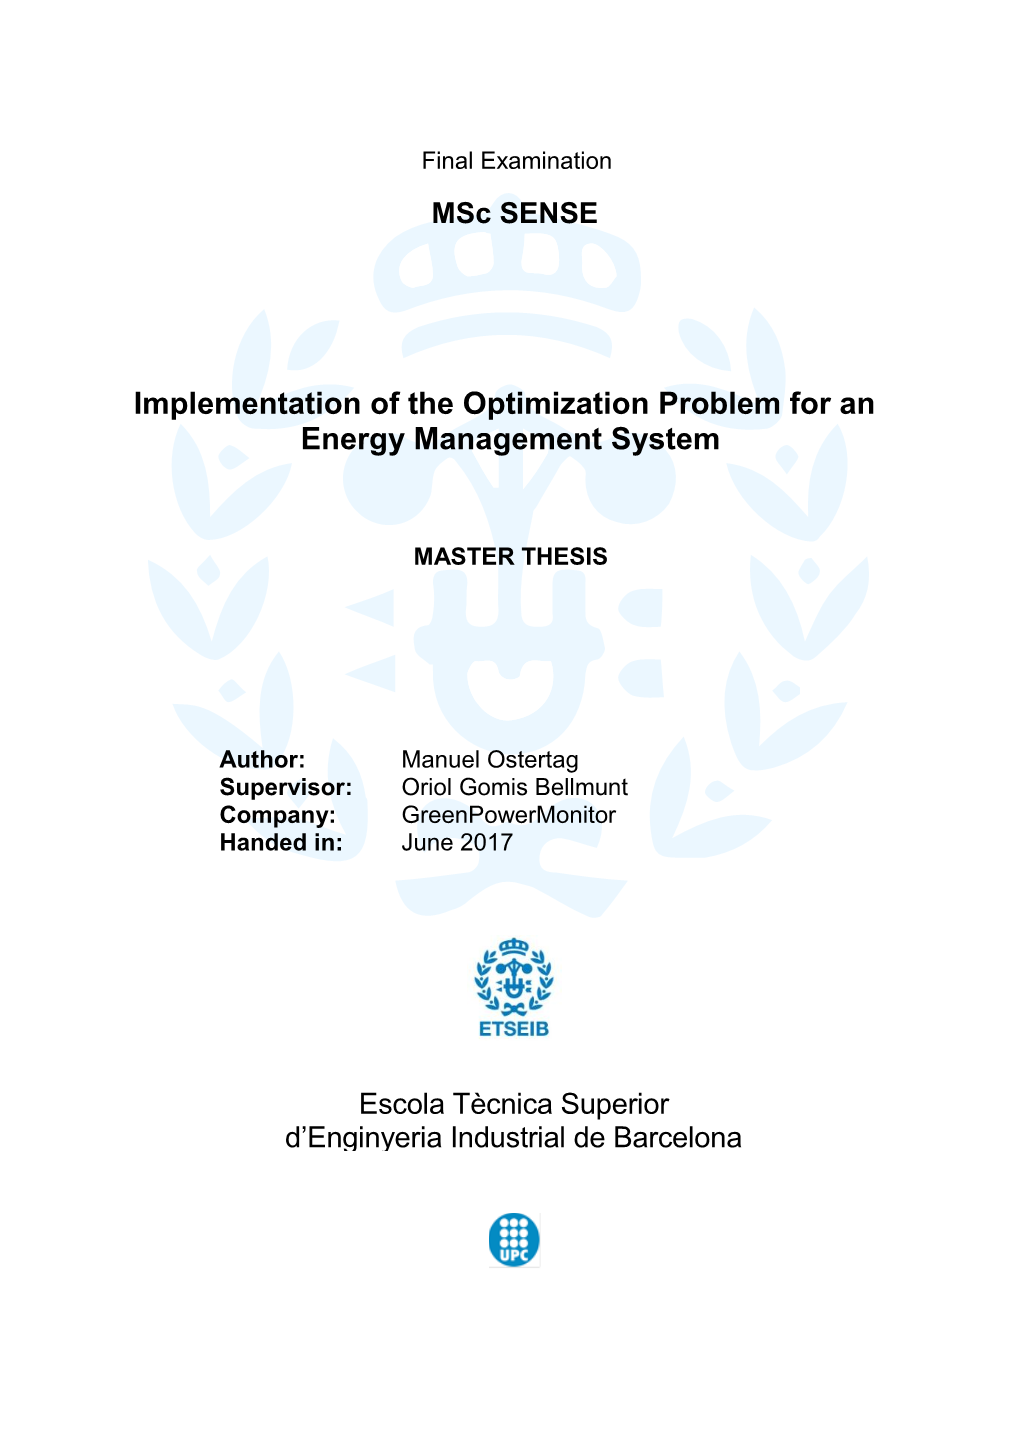 Implementation of the Optimization Problem for an Energy Management System